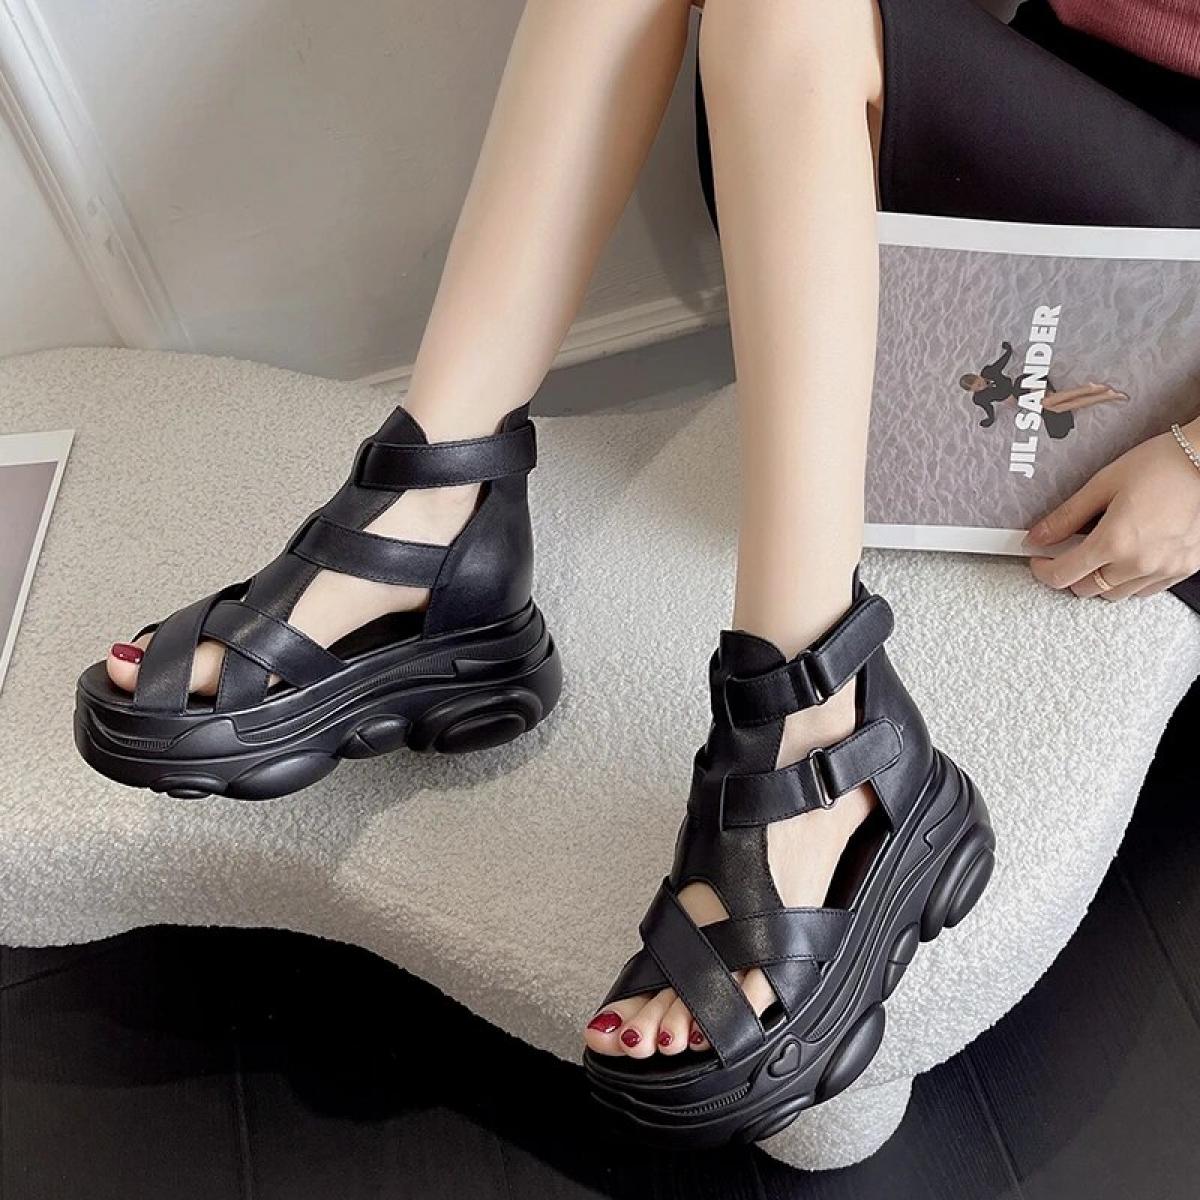 2023 Spring New Spring And Summer Women's Sandals Mid Heel Open Toe Roman Shoes Hollow Out Open Toe Flat Women's Shoes F